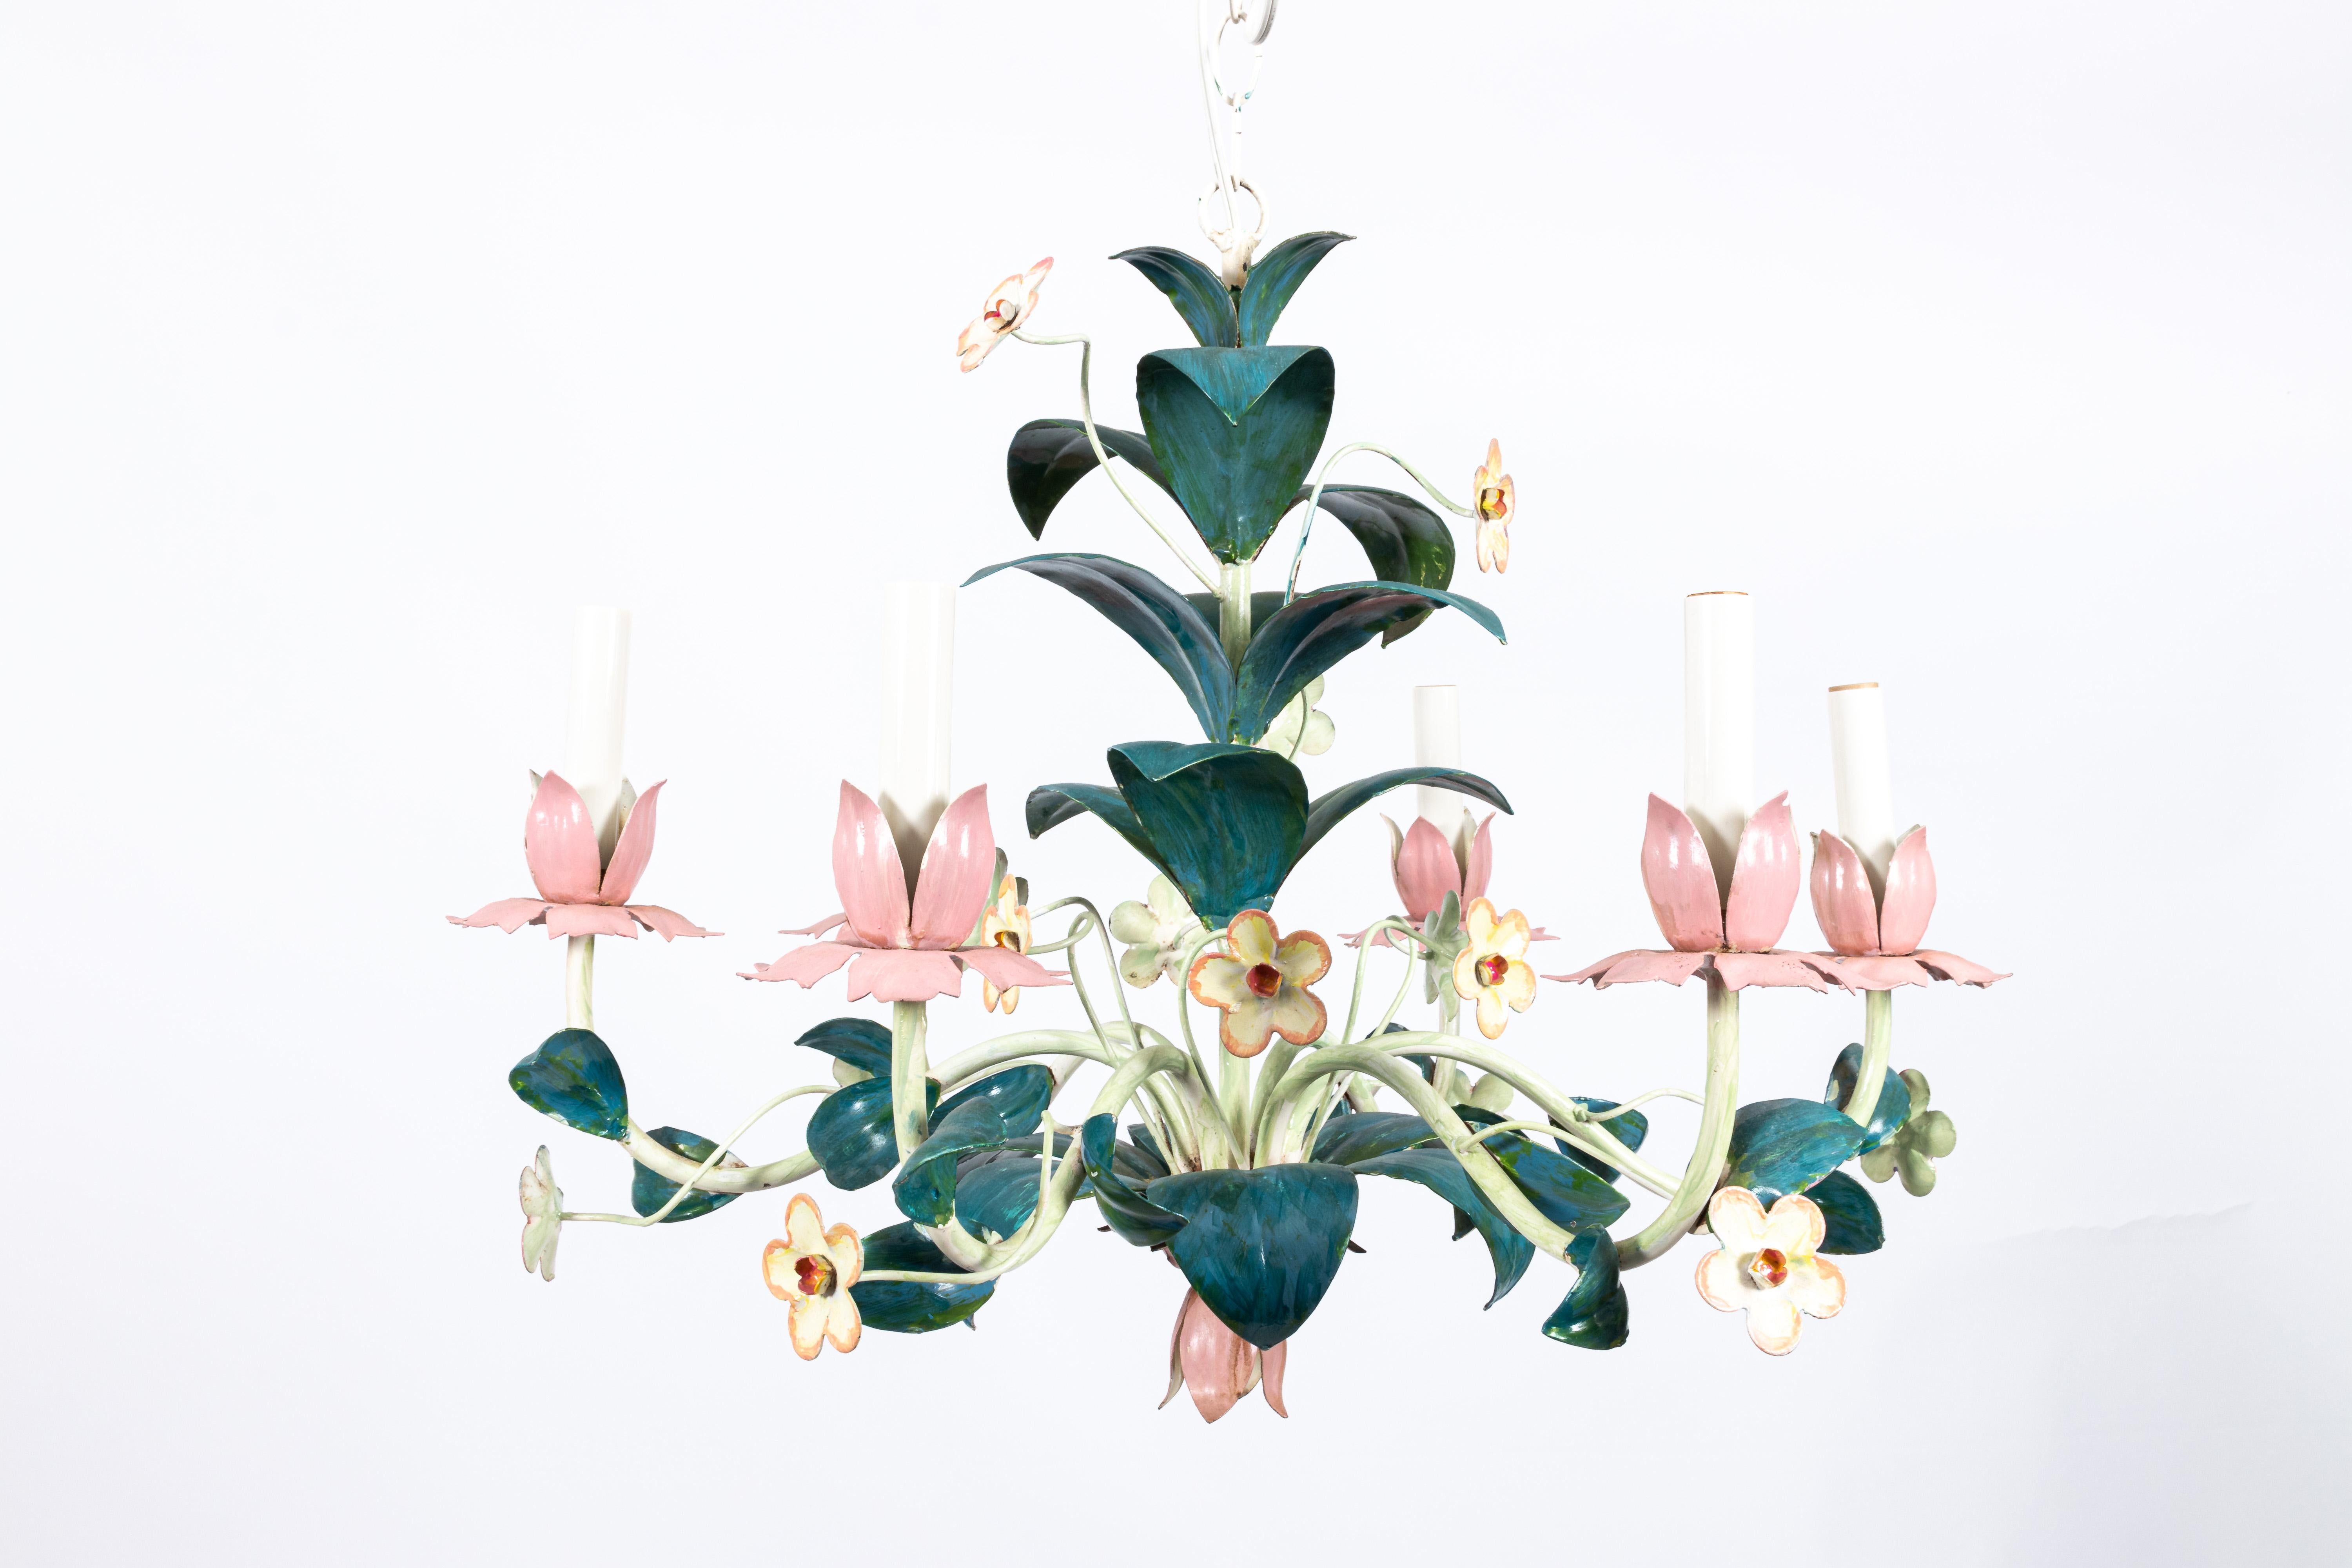 Tole Painted Italian Floral Chandelier 3